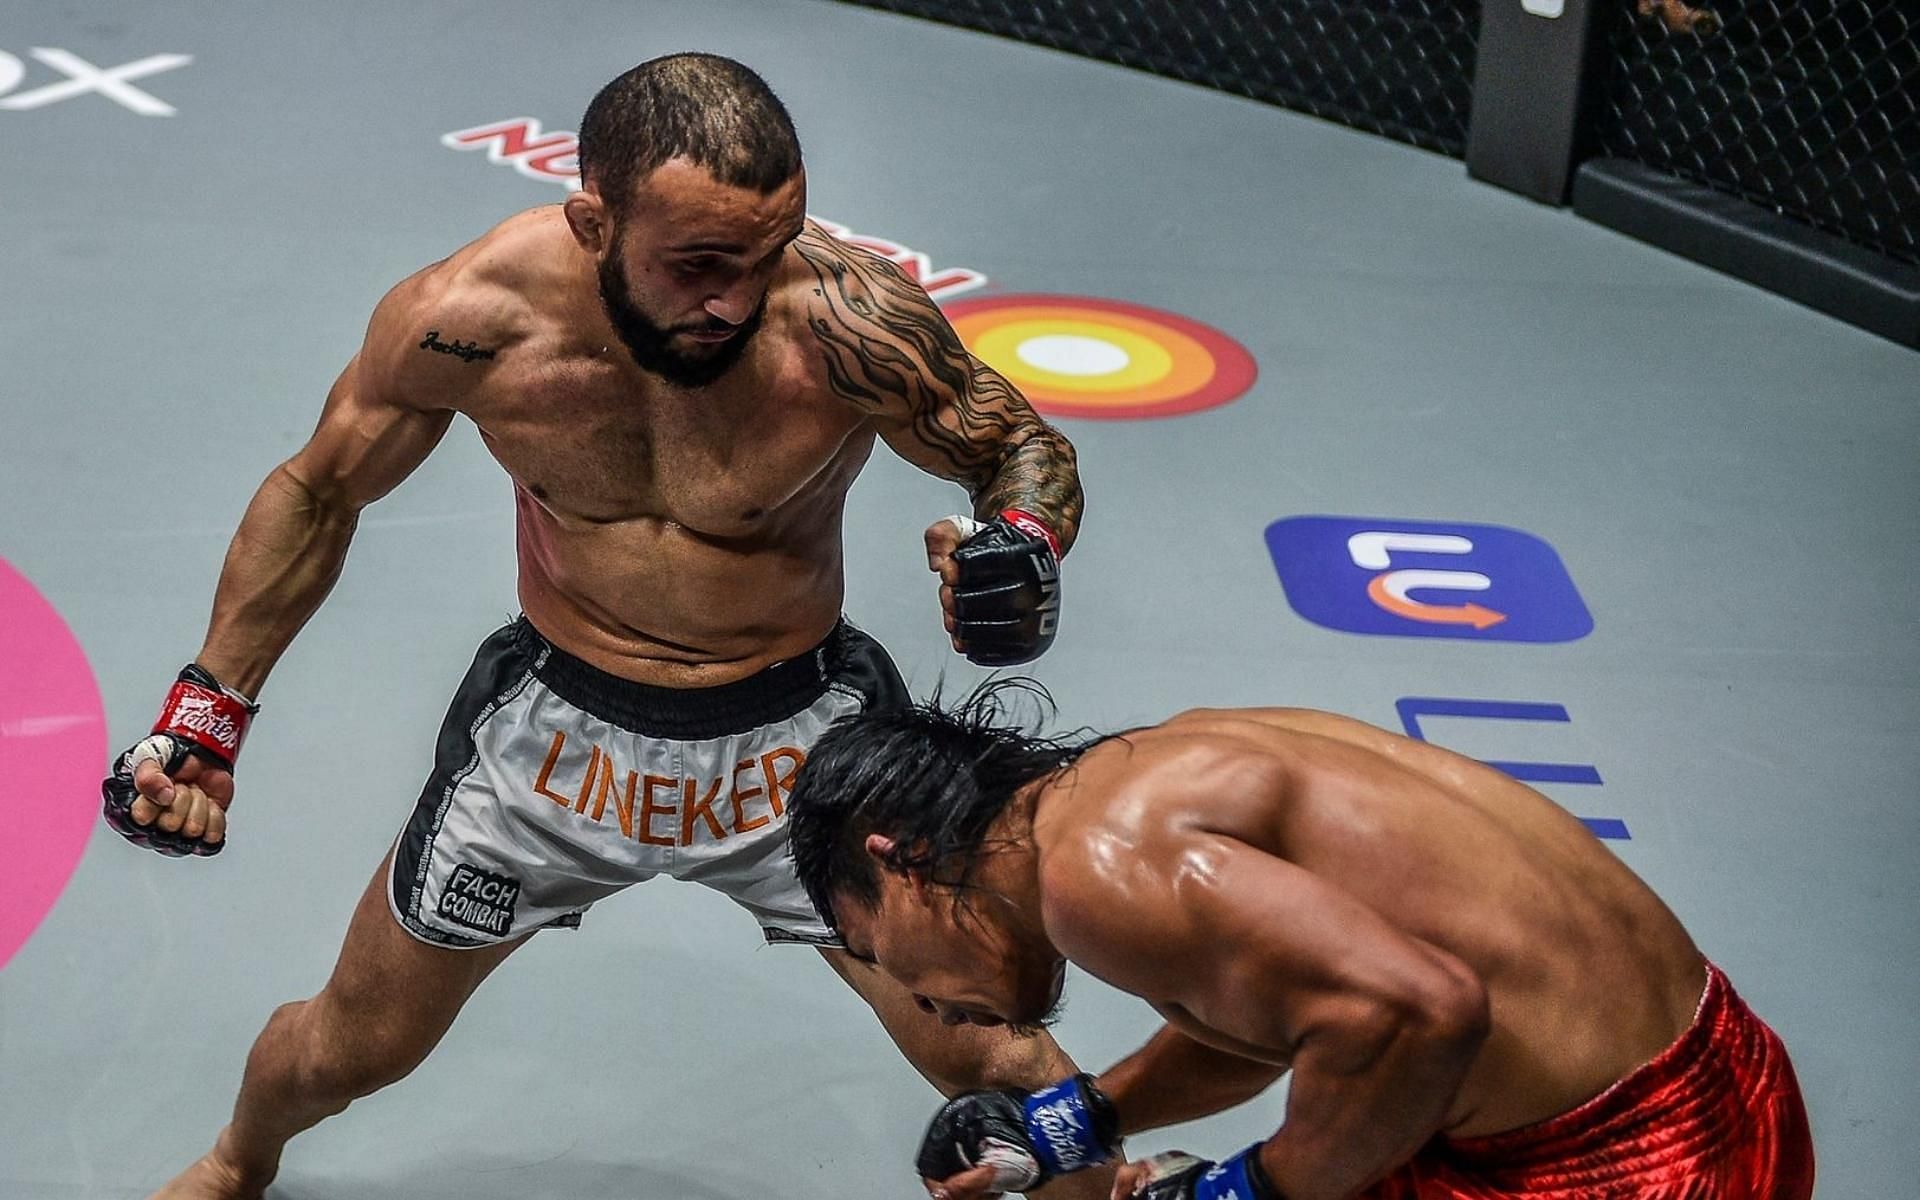 John Lineker (left) will headline the ONE Championship fight card for ONE: Bad Blood alongside Bibiano Fernandes. (Image courtesy of ONE Championship)